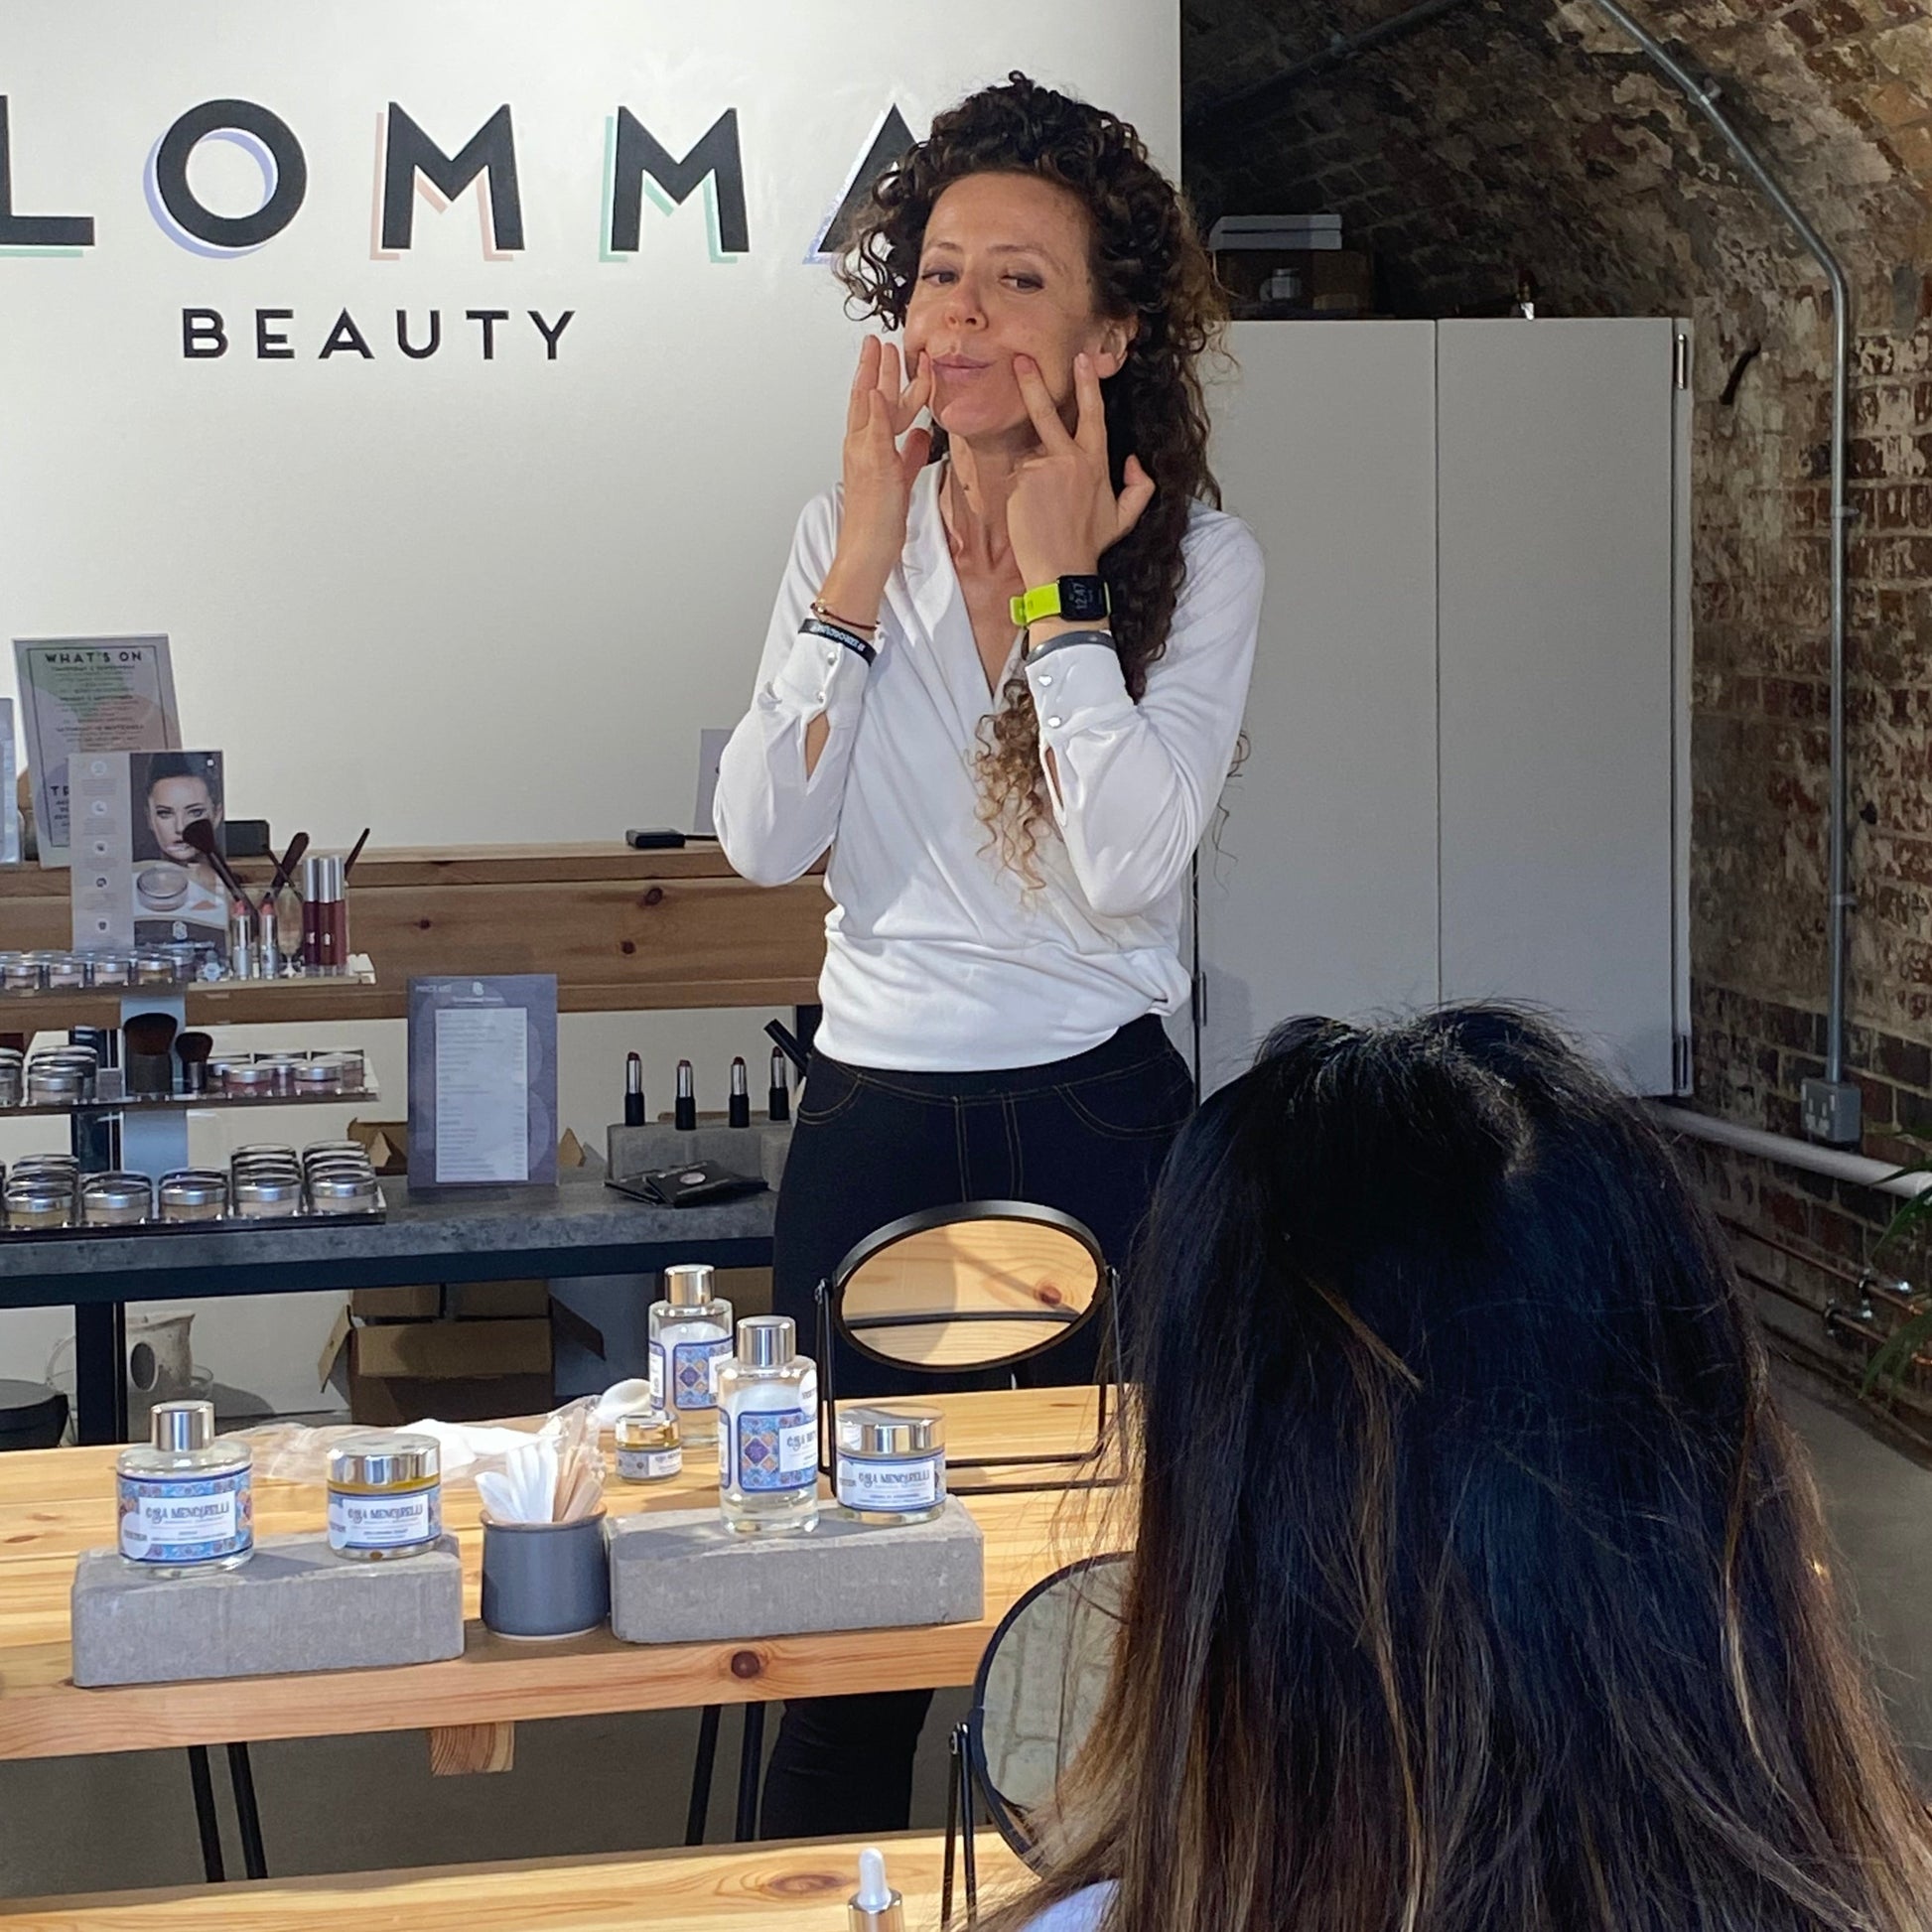 lucia mencarelli is teaching a face massage class. She can be seen using her fingers to sculpt her face. the back of a student's head can be seen in the foreground and they are surrounded by organic skincare products